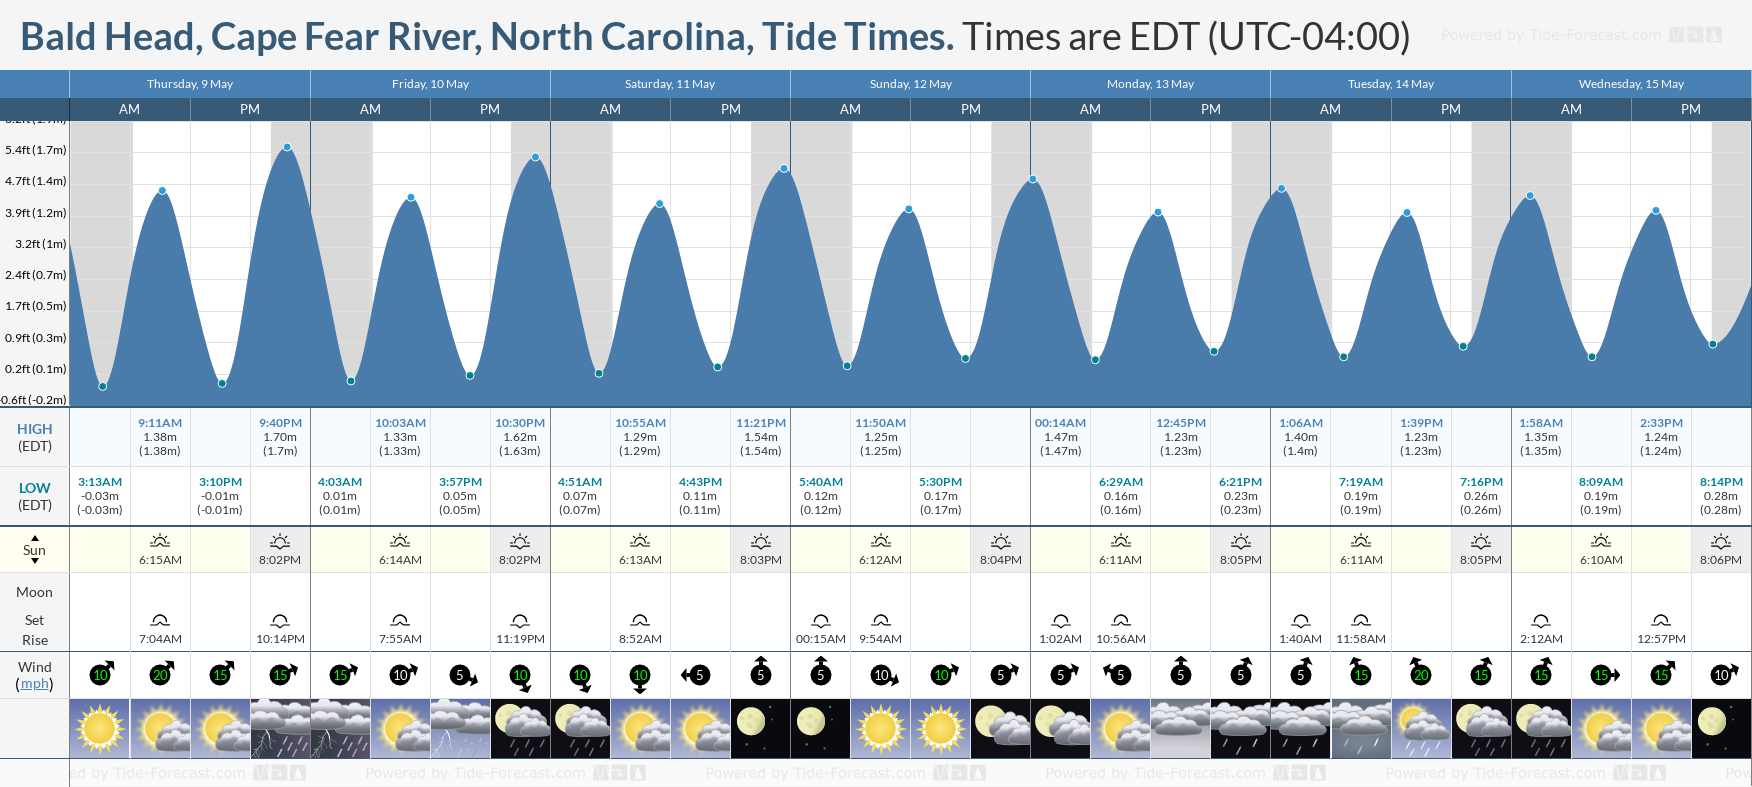 Bald Head, Cape Fear River, North Carolina Tide Chart including high and low tide tide times for the next 7 days